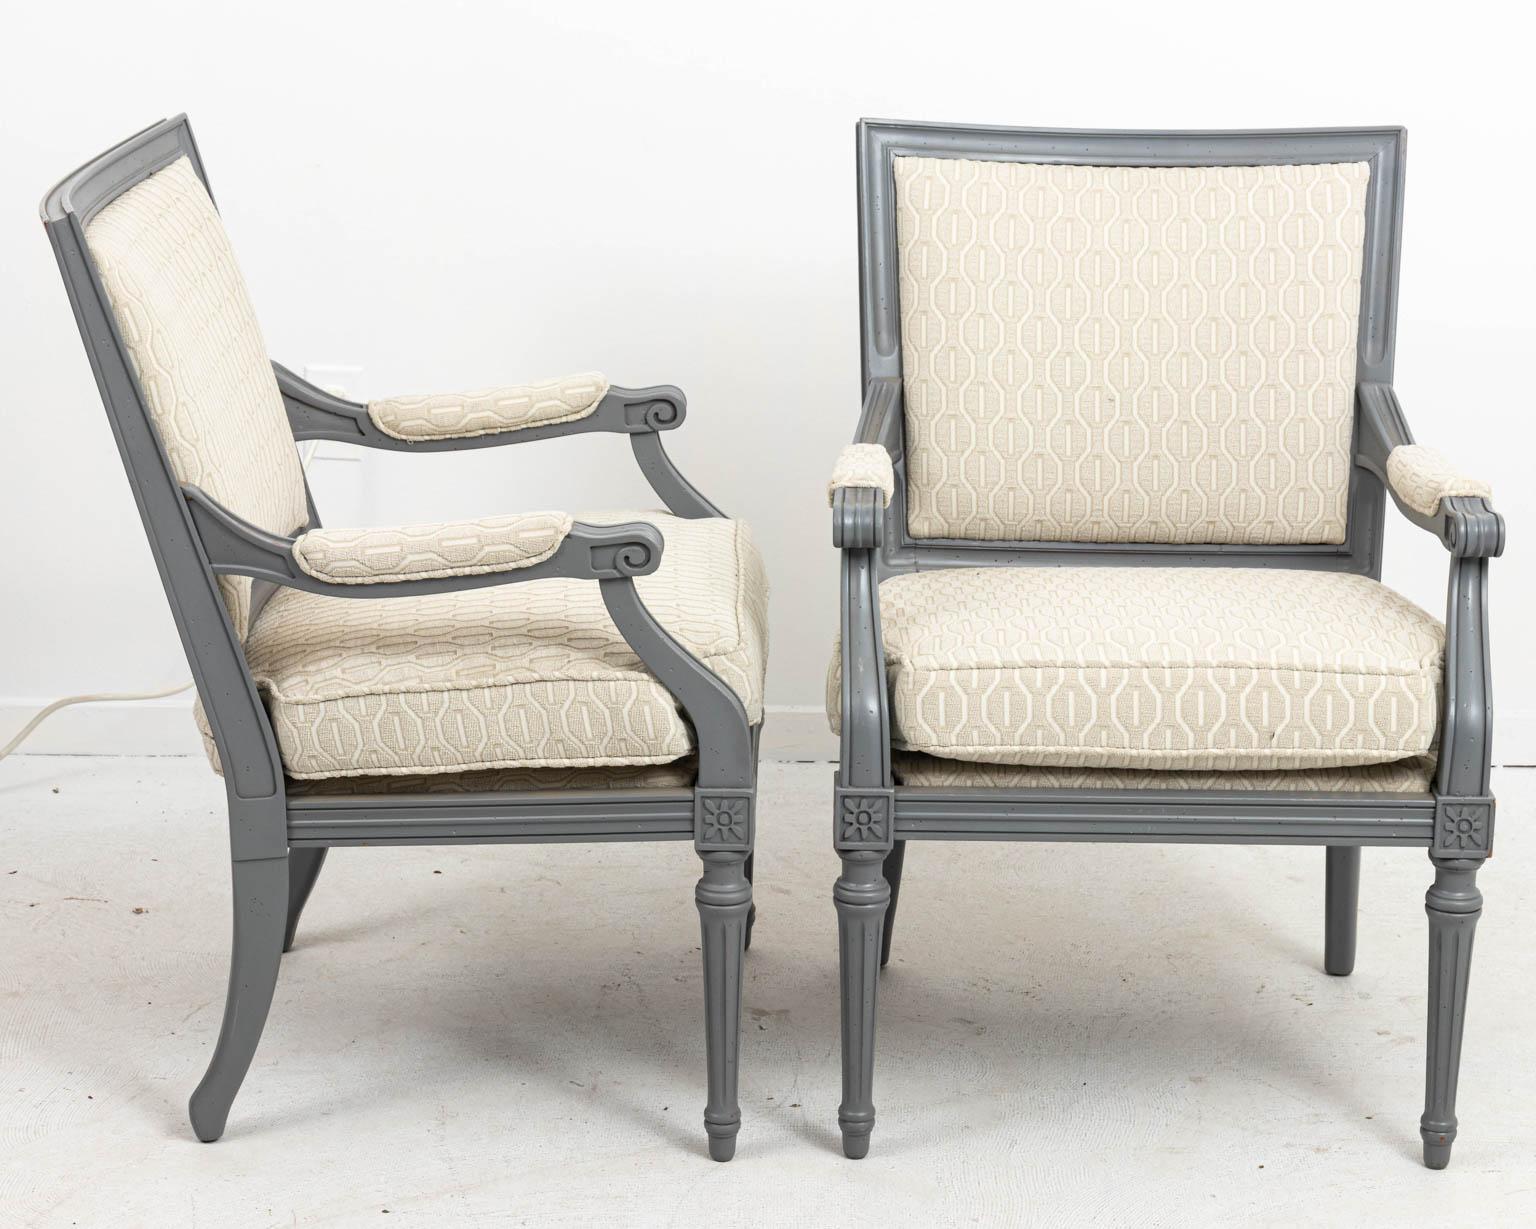 Pair of upholstered French Directoire armchairs with painted wood frame and square backs. Please note of wear consistent with age.